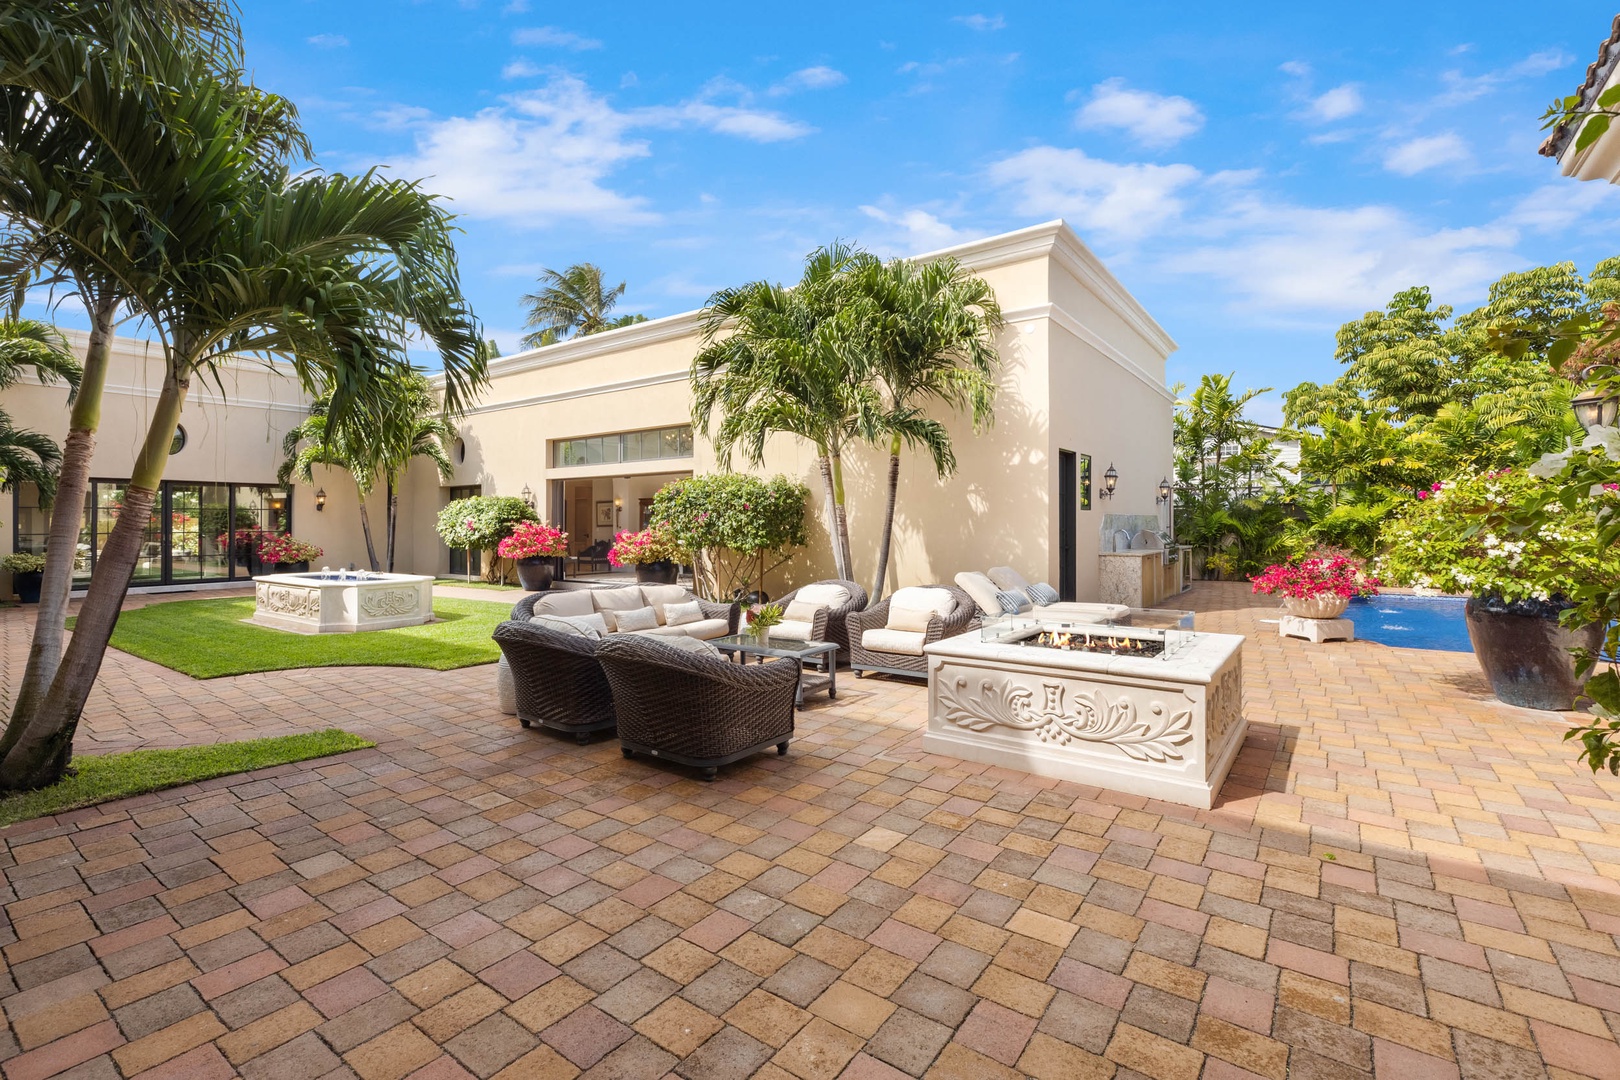 Honolulu Vacation Rentals, The Kahala Mansion - Outdoor lanai with a luxurious lounge area, perfect for entertaining or relaxation under the palm trees.